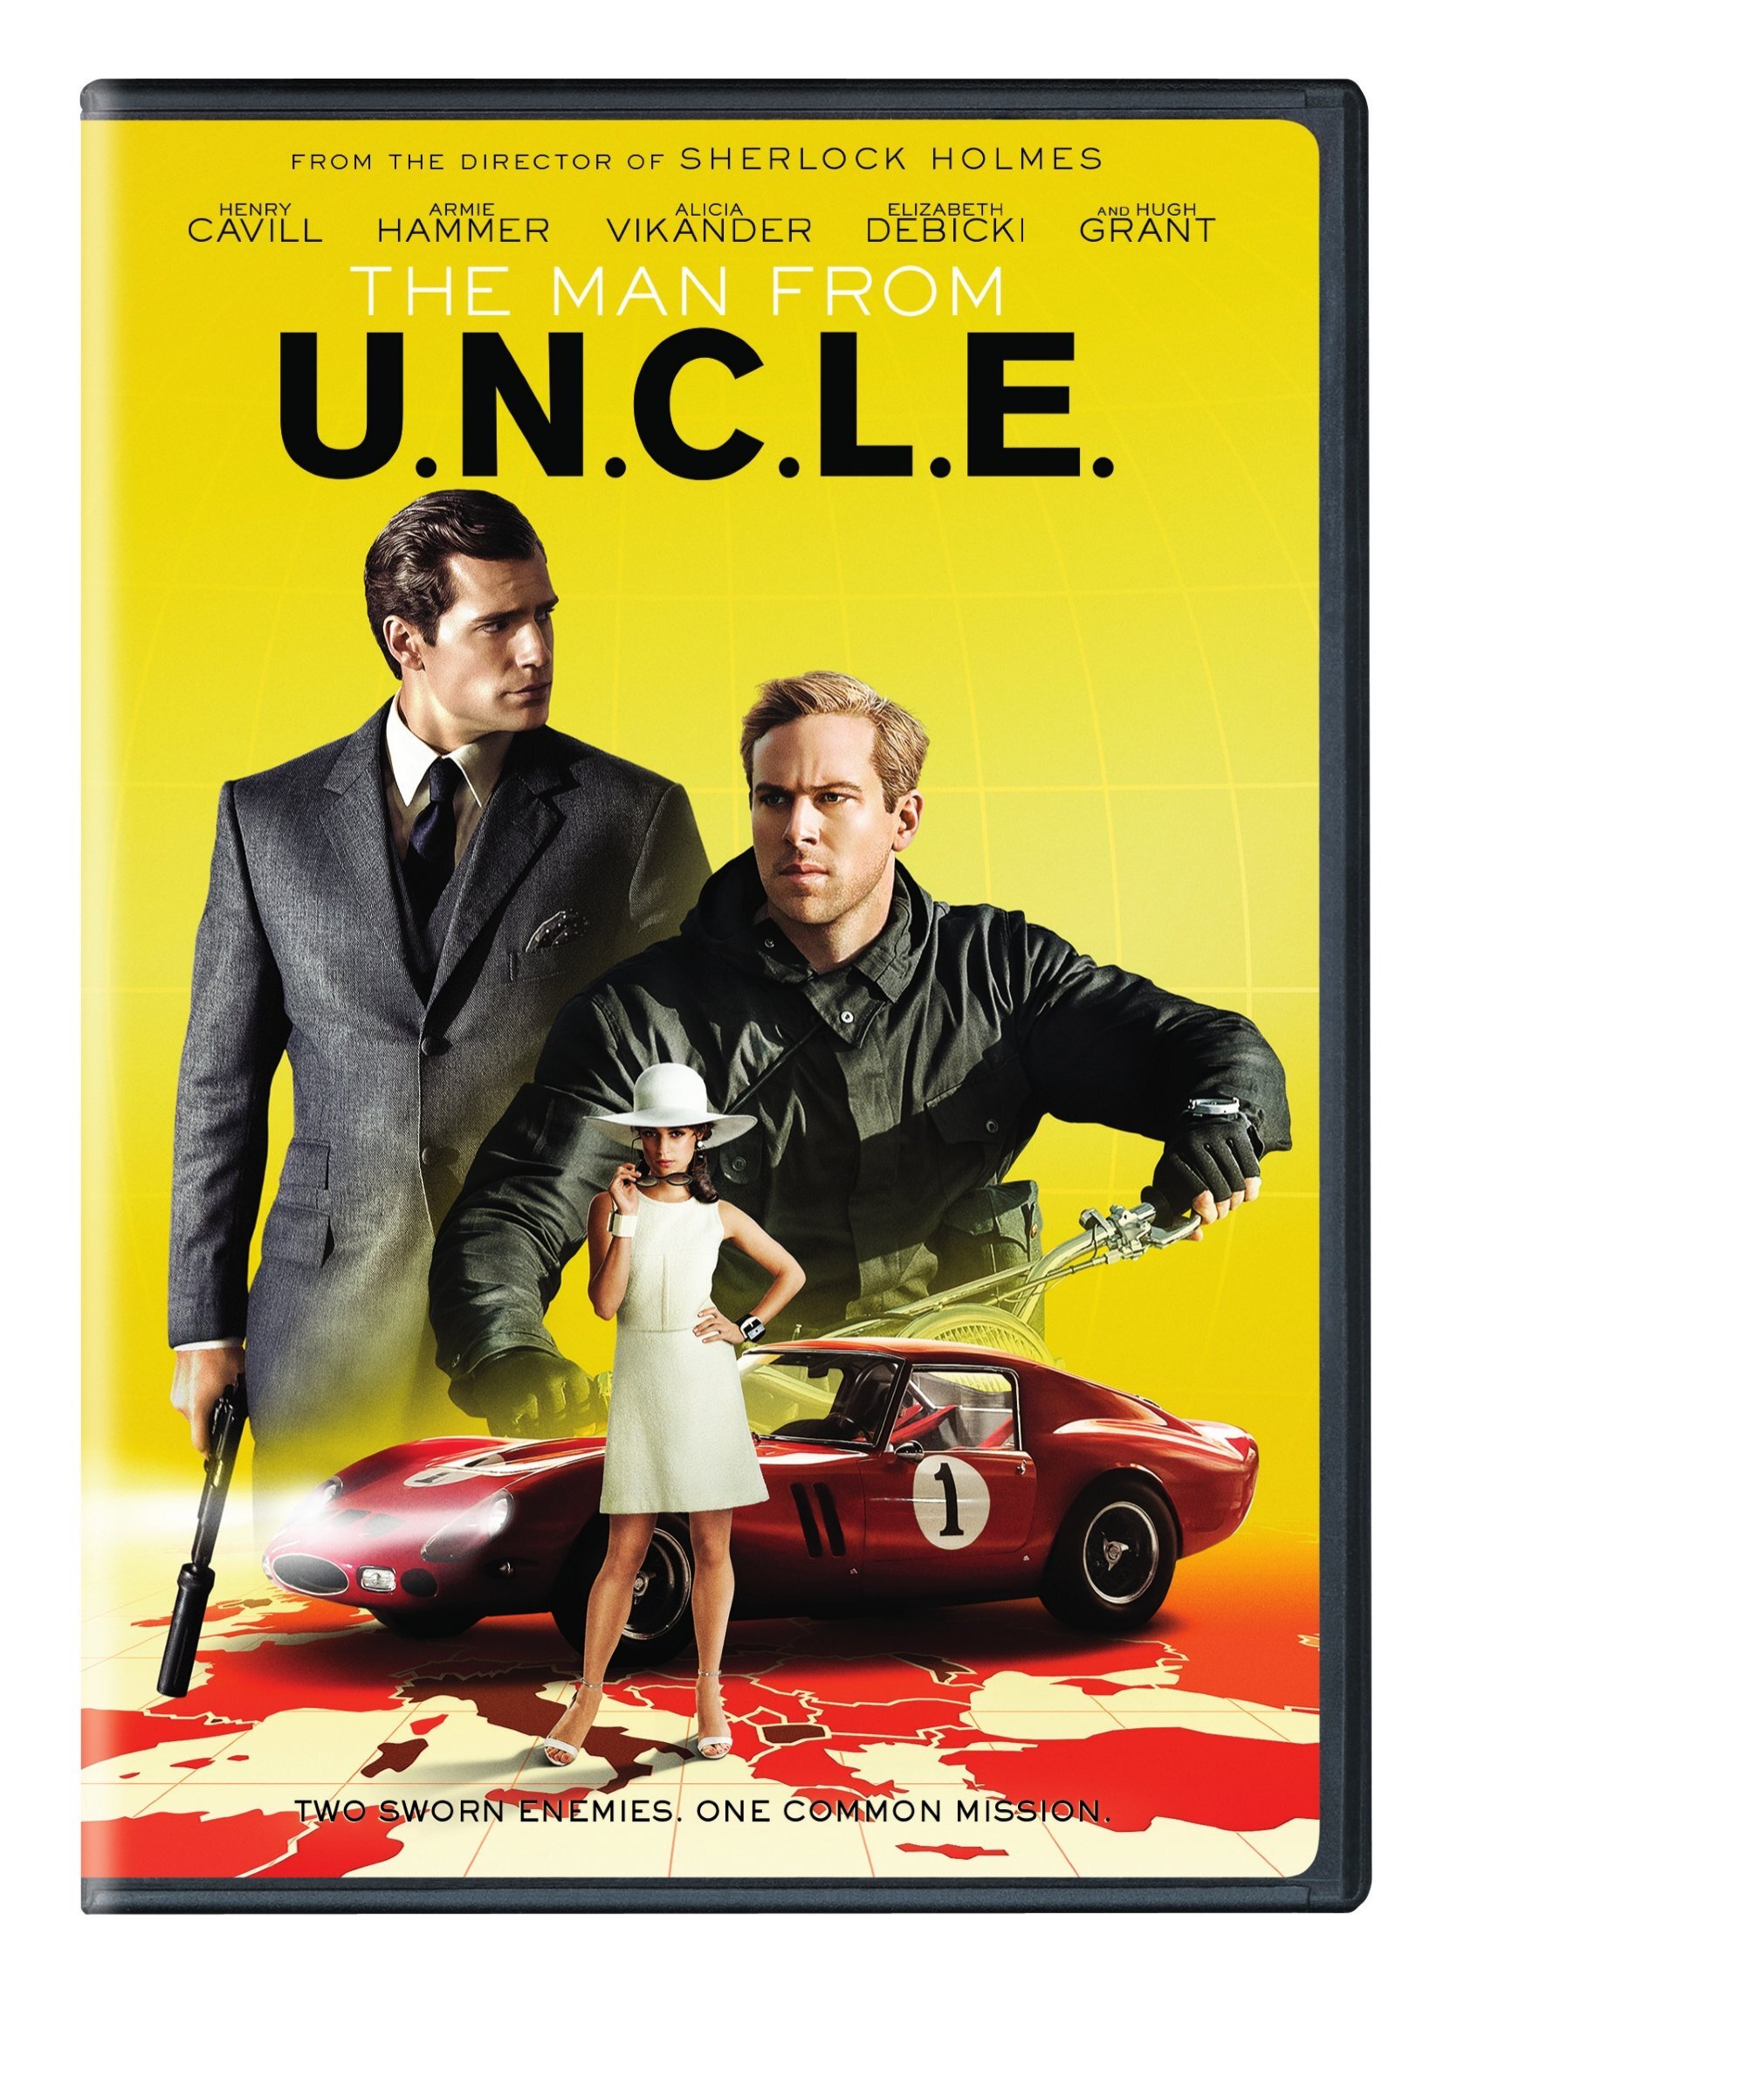 The Man From U.N.C.L.E. - DVD [ 2015 ]  - Adventure Movies On DVD - Movies On GRUV